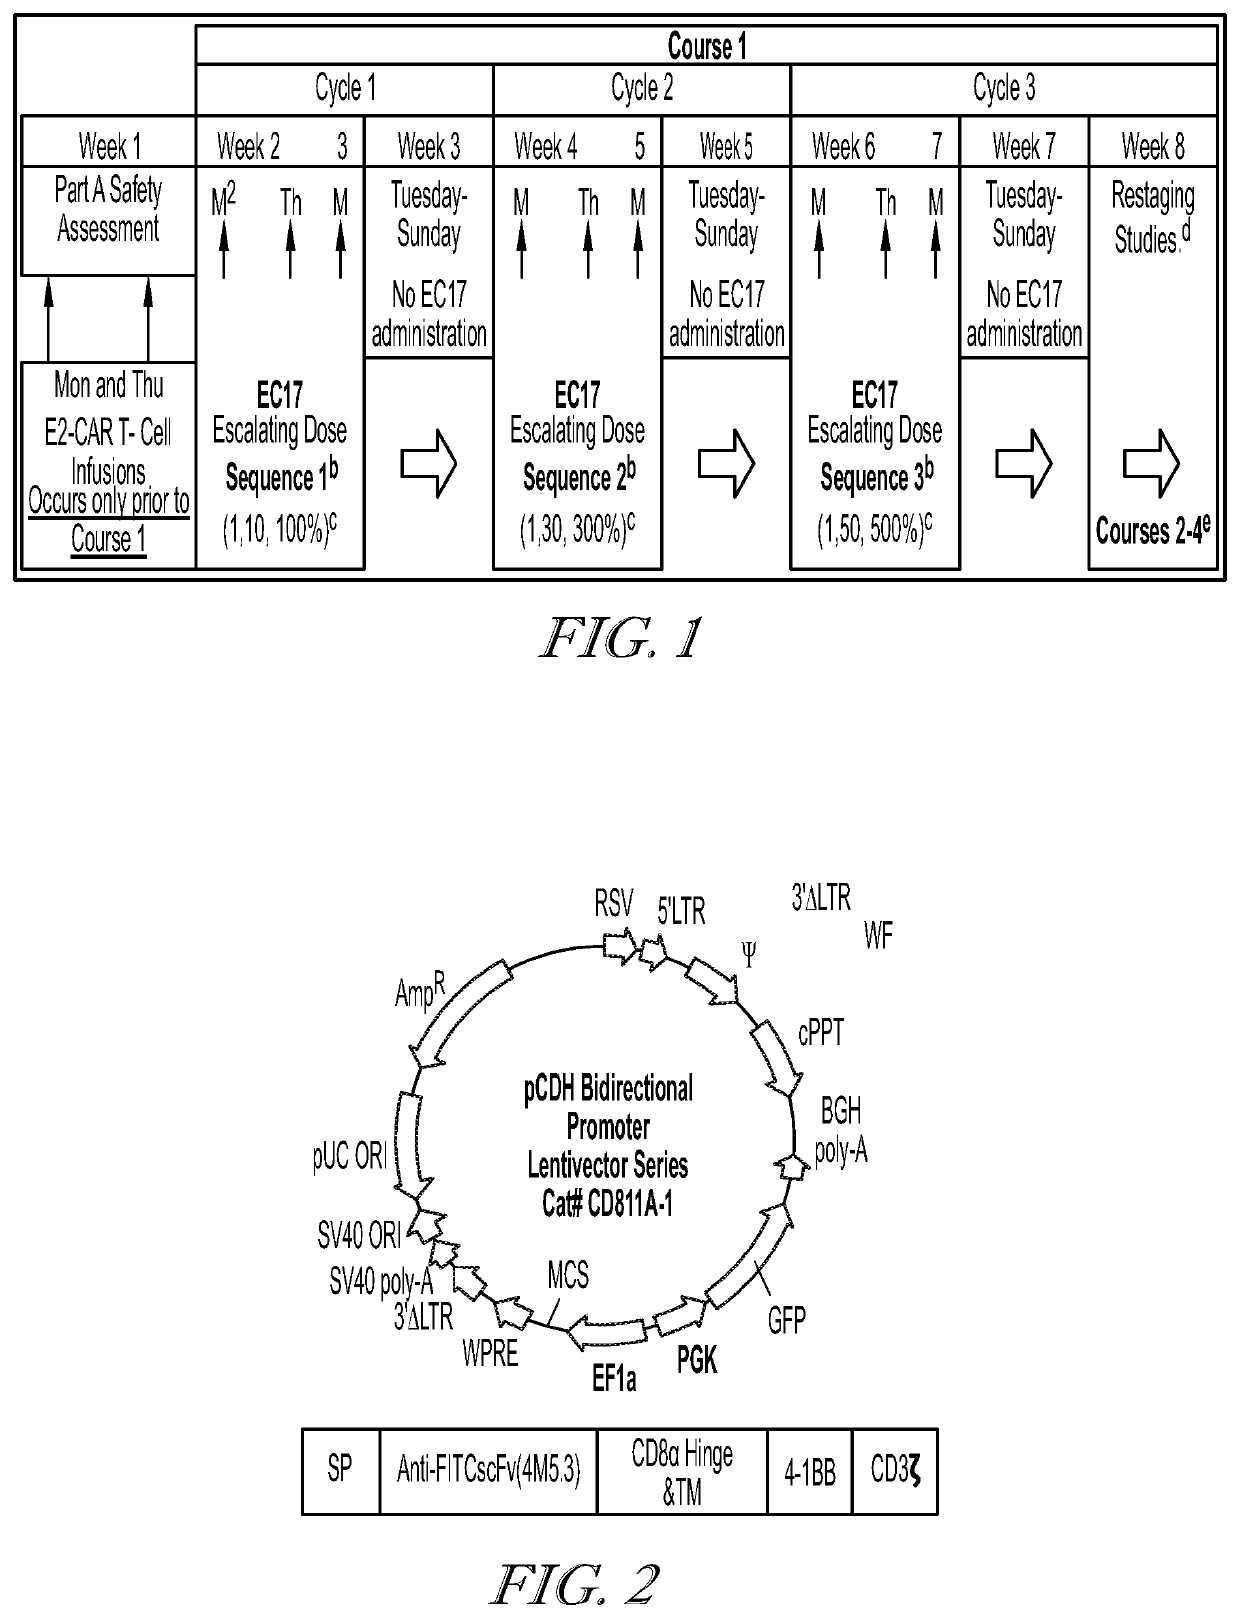 Sequencing method for car t cell therapy